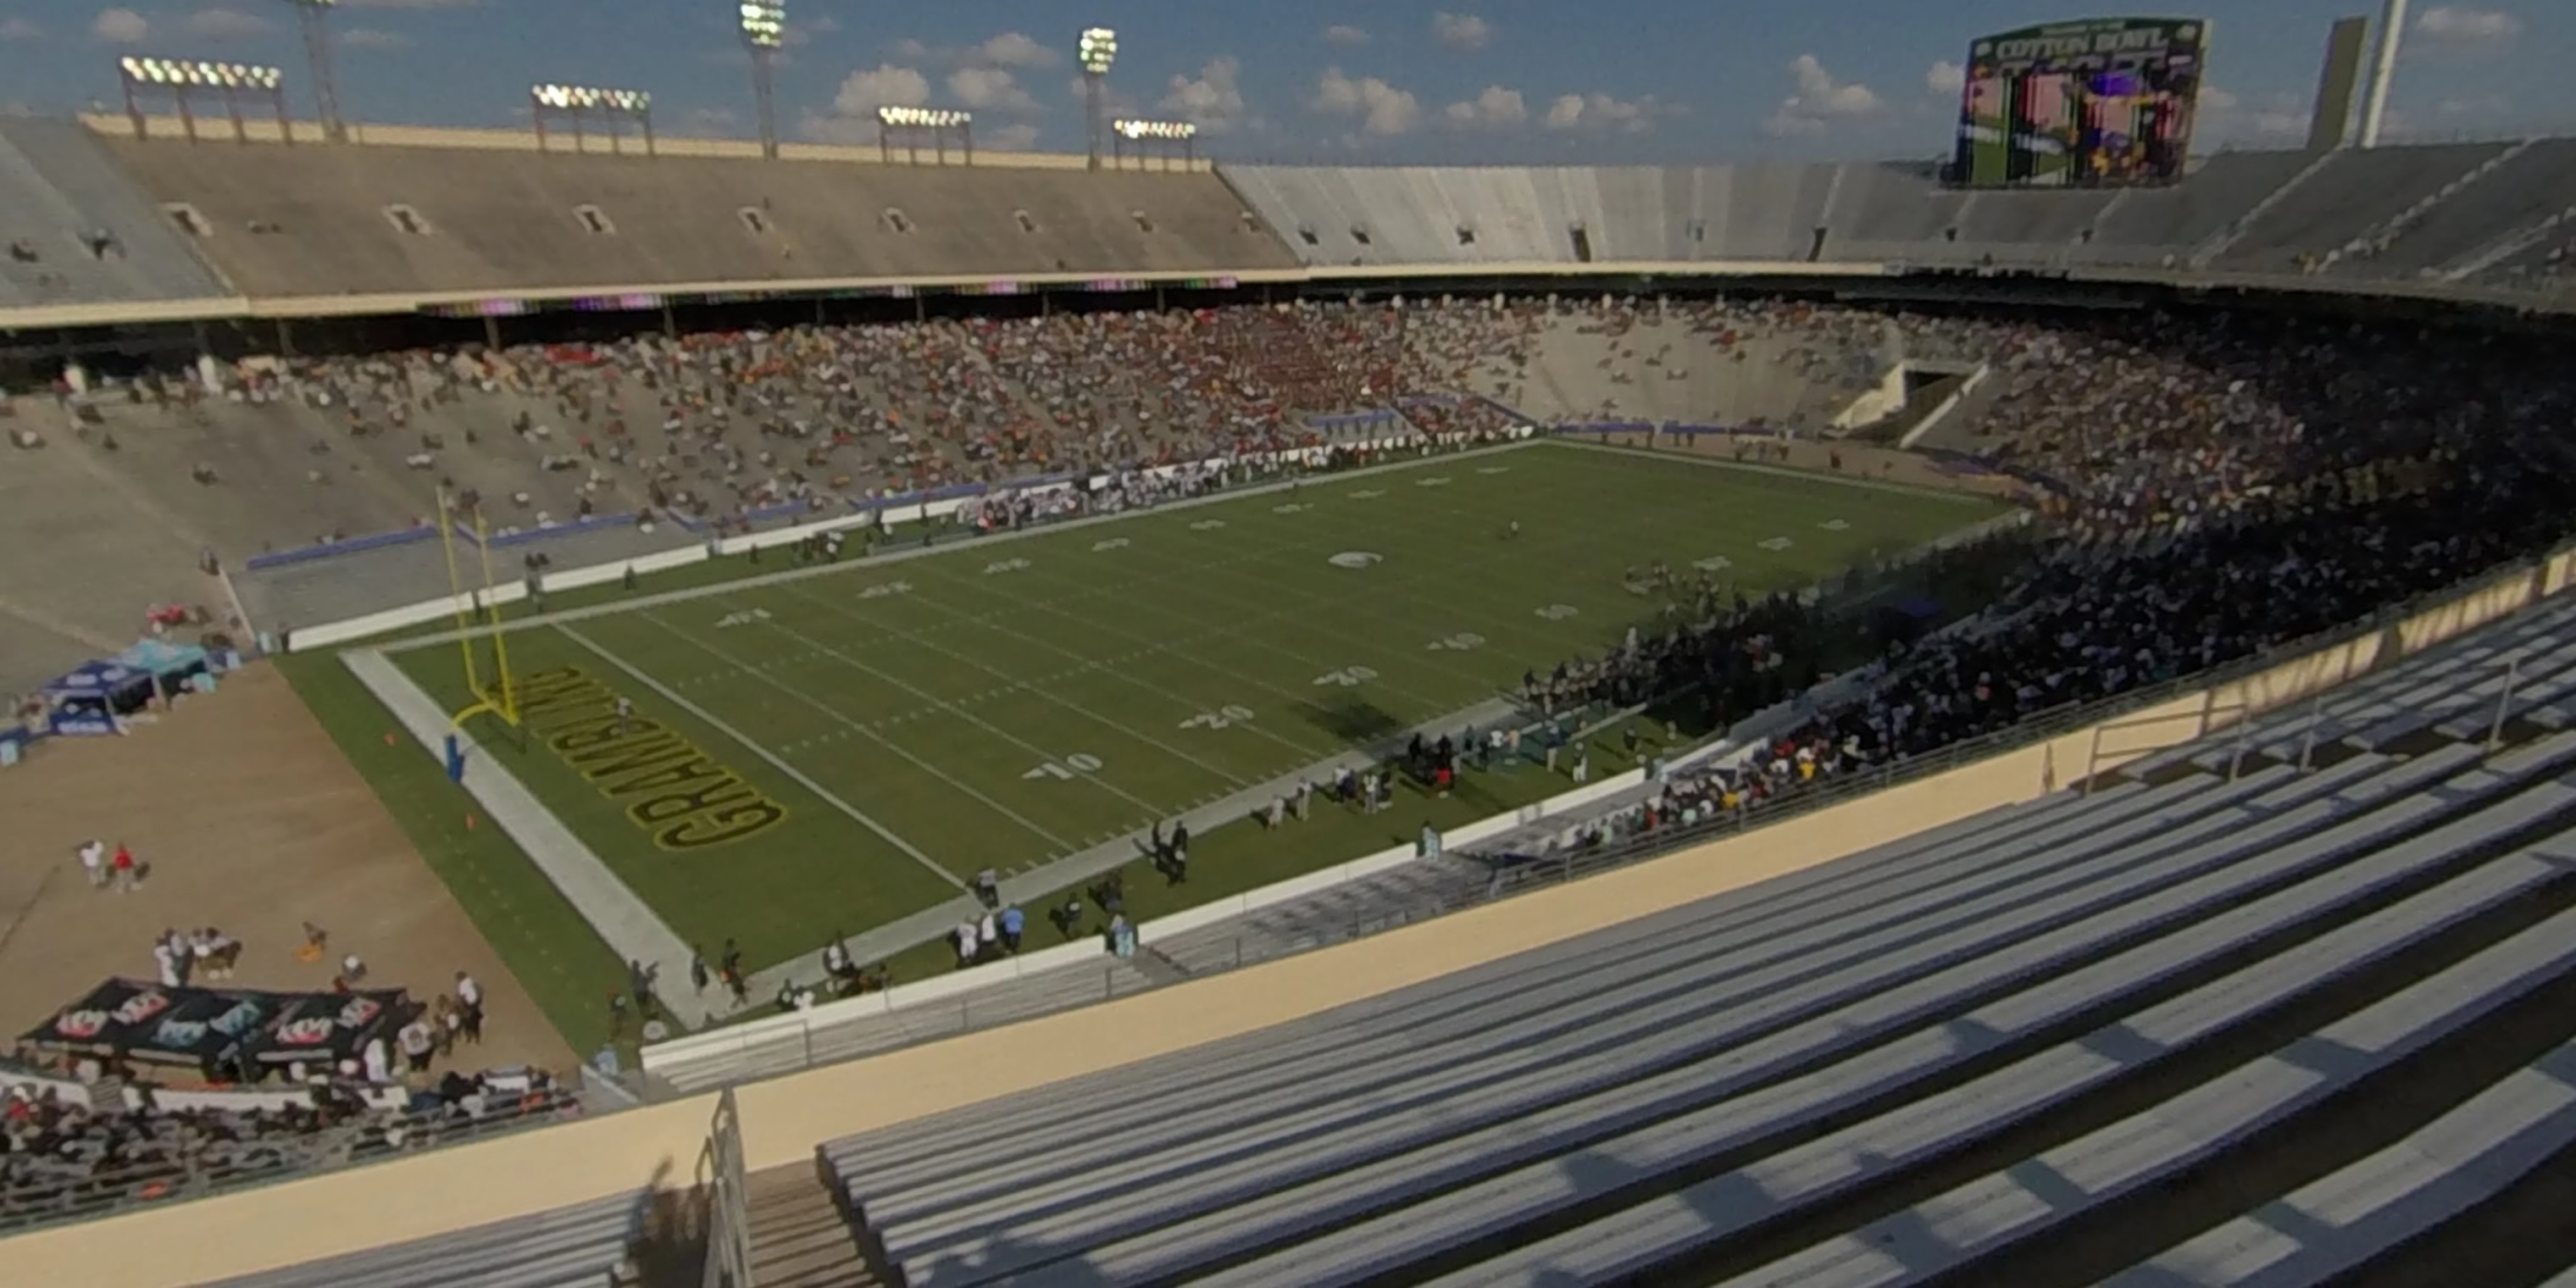 section 110 panoramic seat view  - cotton bowl